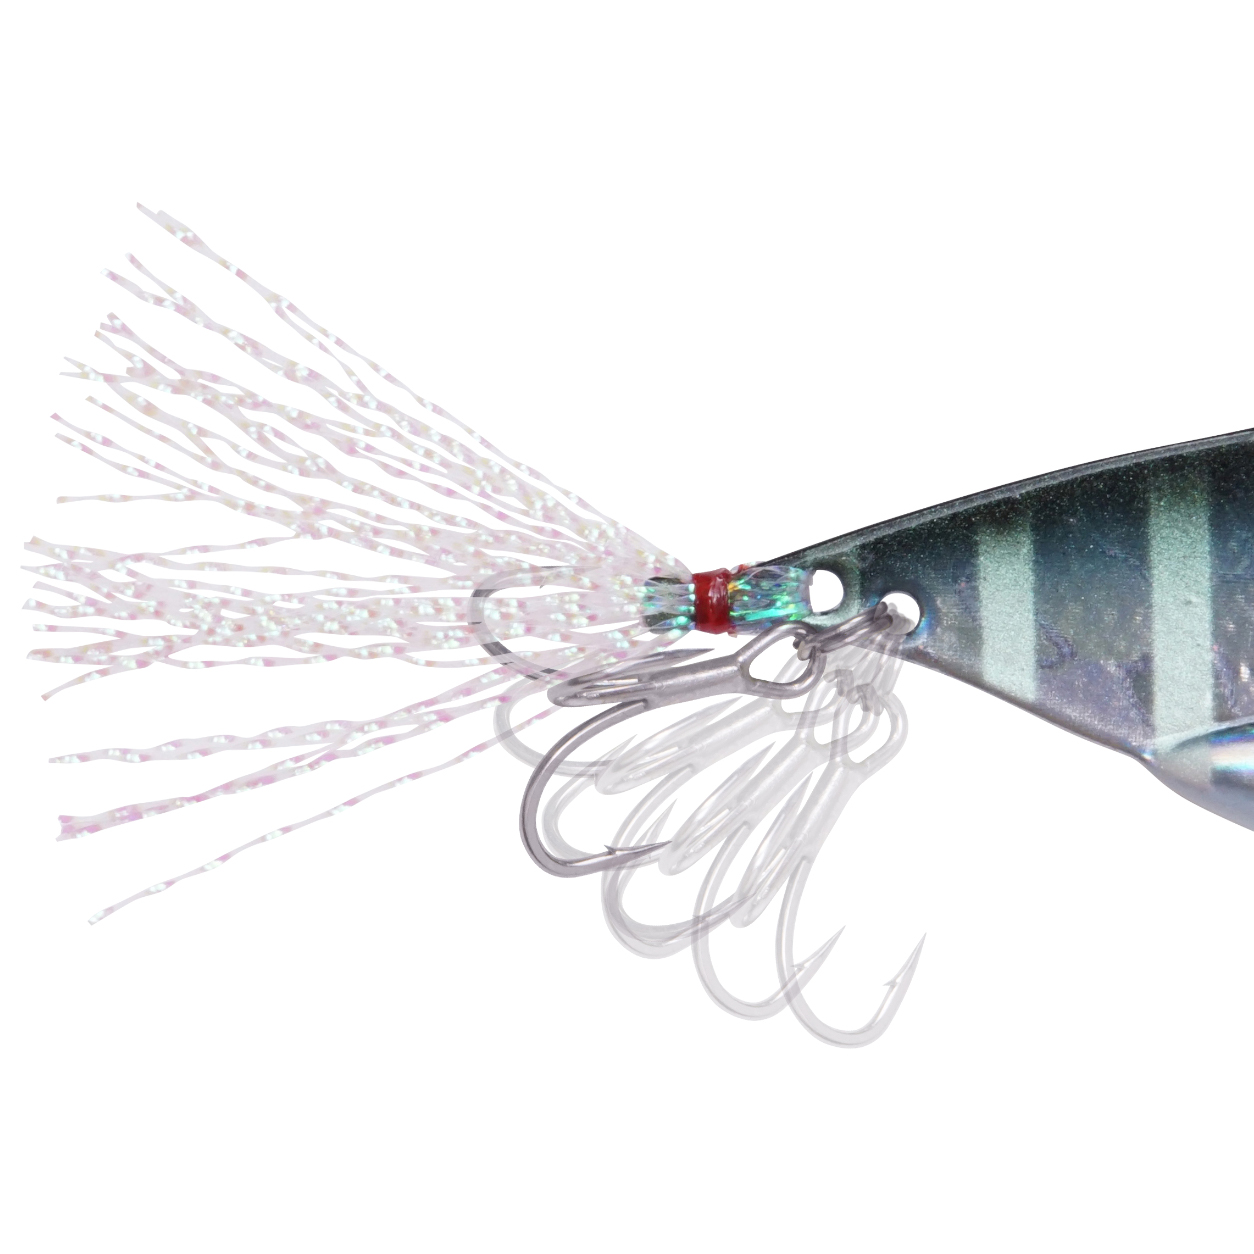 McClelland's Blade Bait and Damiki Winter Bass System - Wired2Fish